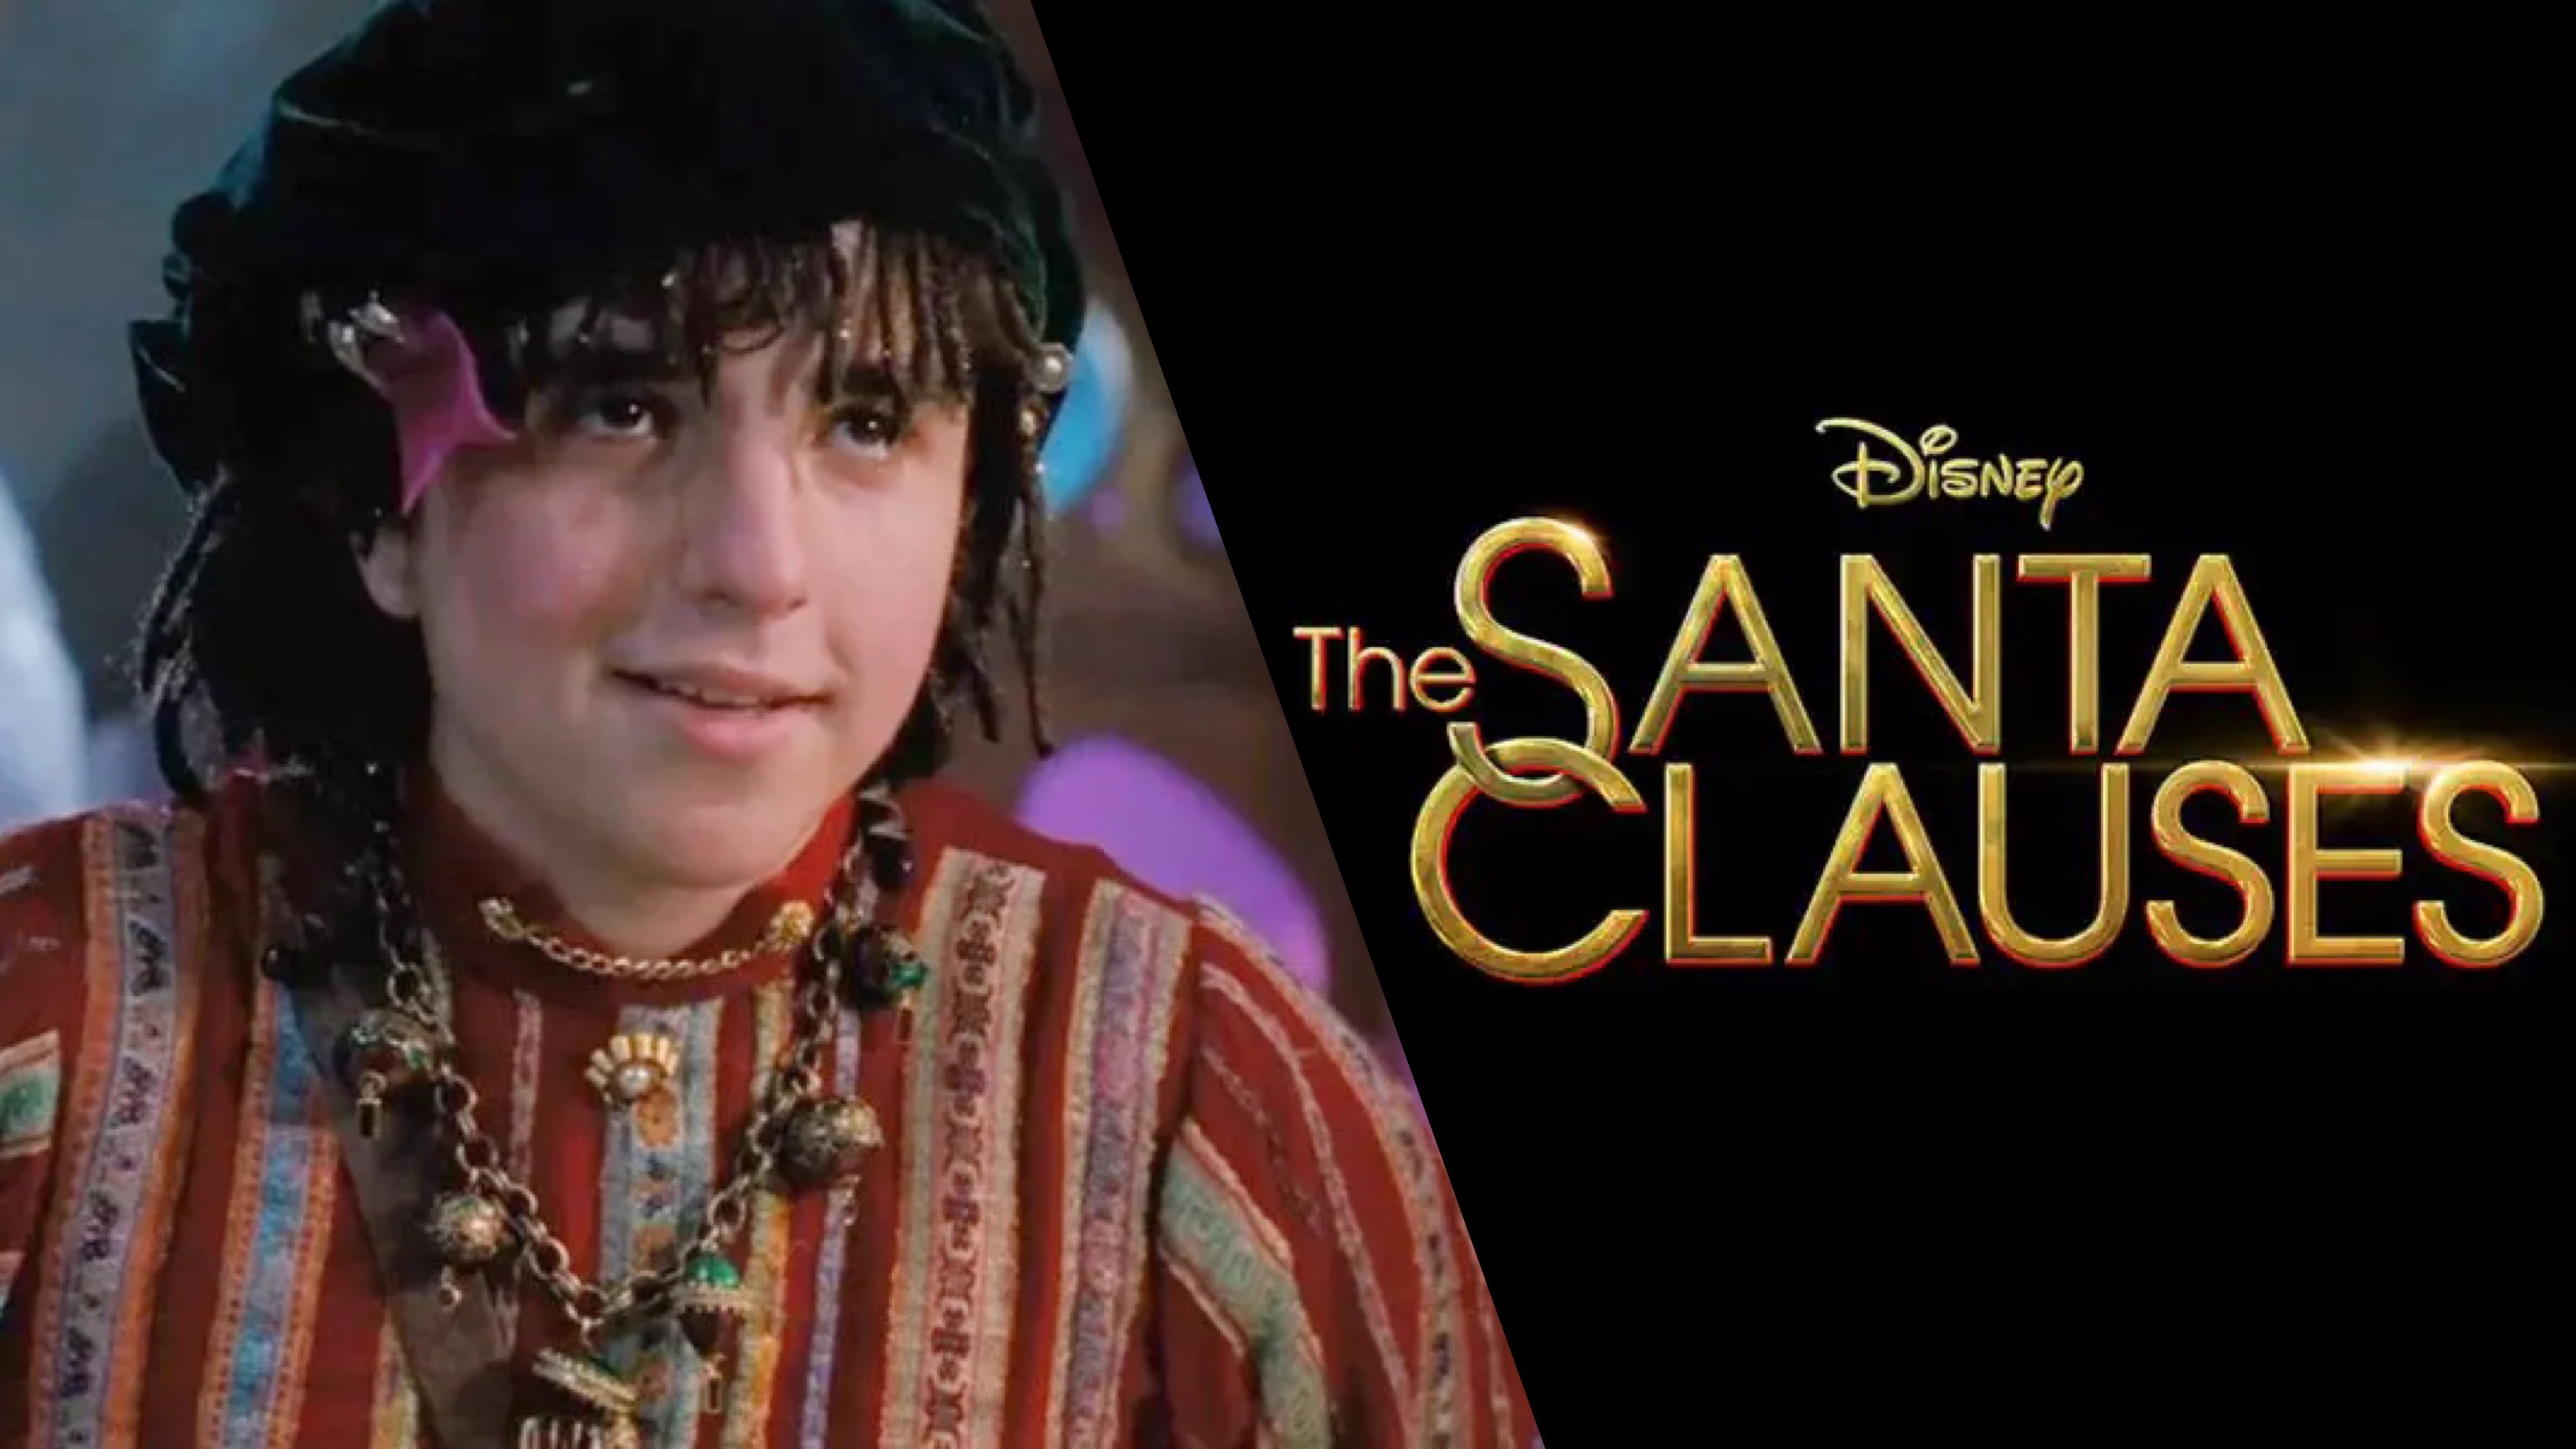 David Krumholtz Returning To Play Fan-Favorite Character In Disney’s ‘The Santa Clauses’